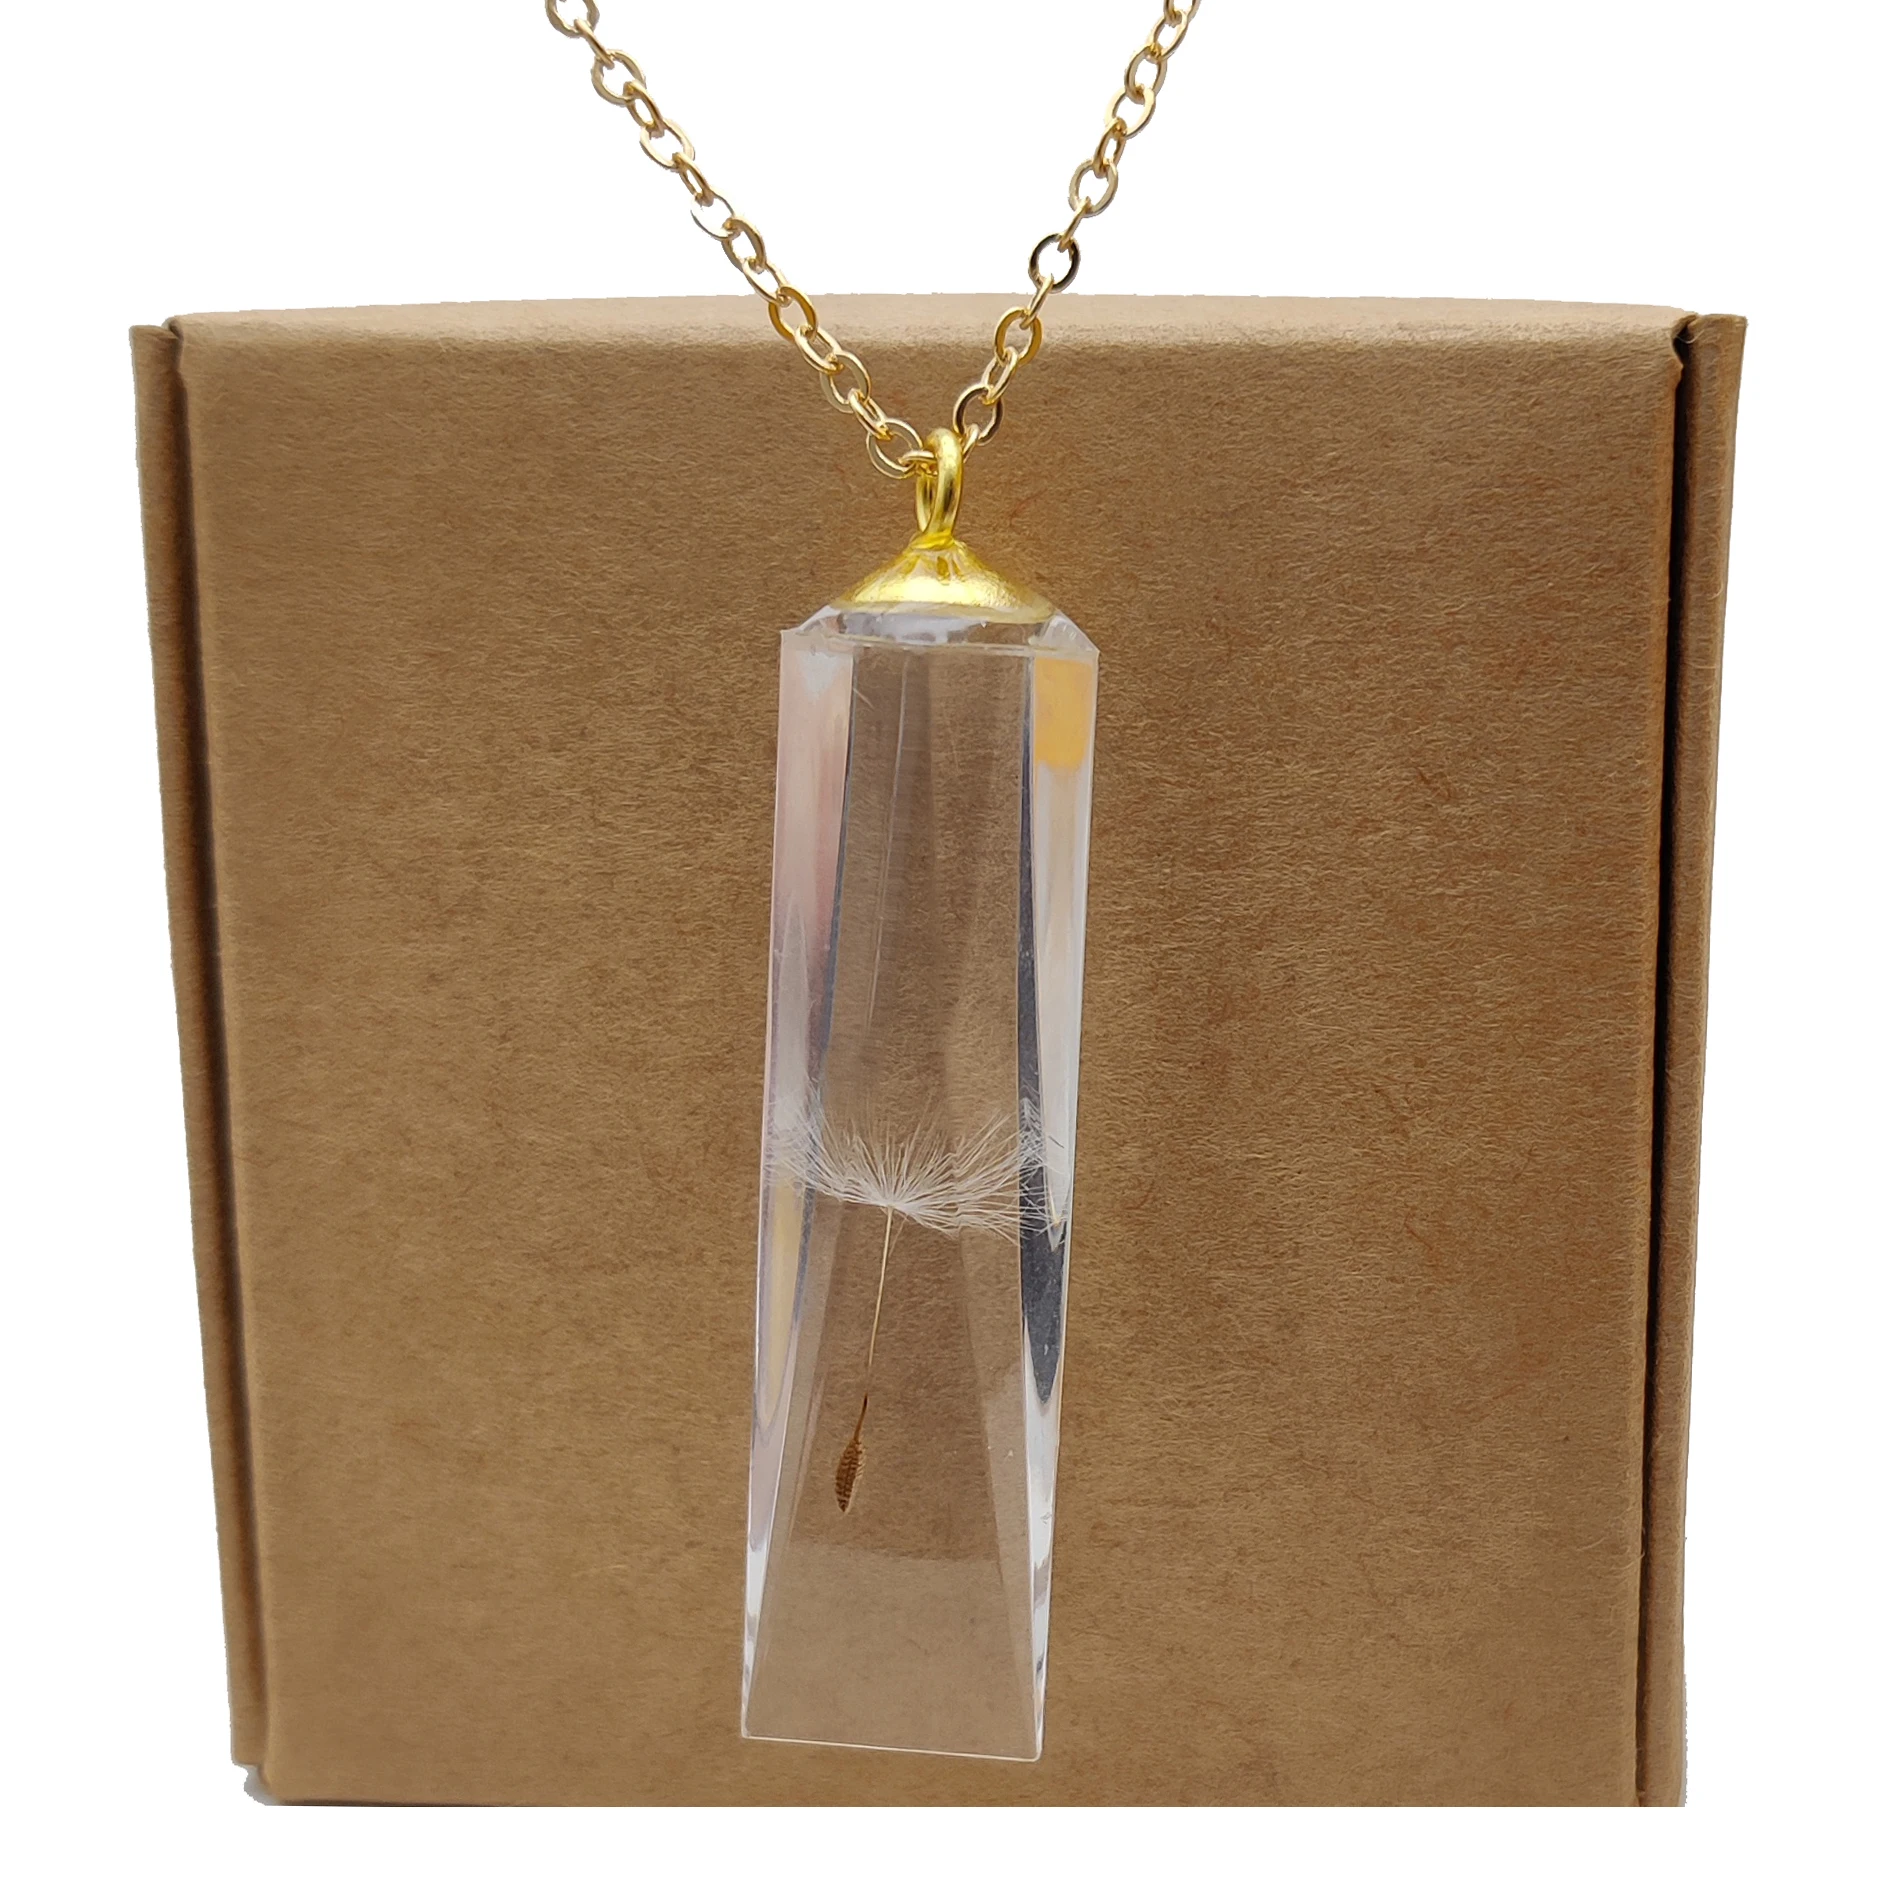 Dandelion Make a Wish Sliced Mirror Cuboid Resin Gold Color Pendant Chain Long Necklace Women Boho Jewelry Bohemian Handmade handmade dried flower filling cuboid mold aroma plaster silicone mold handicrafts soap resin casting mold diy